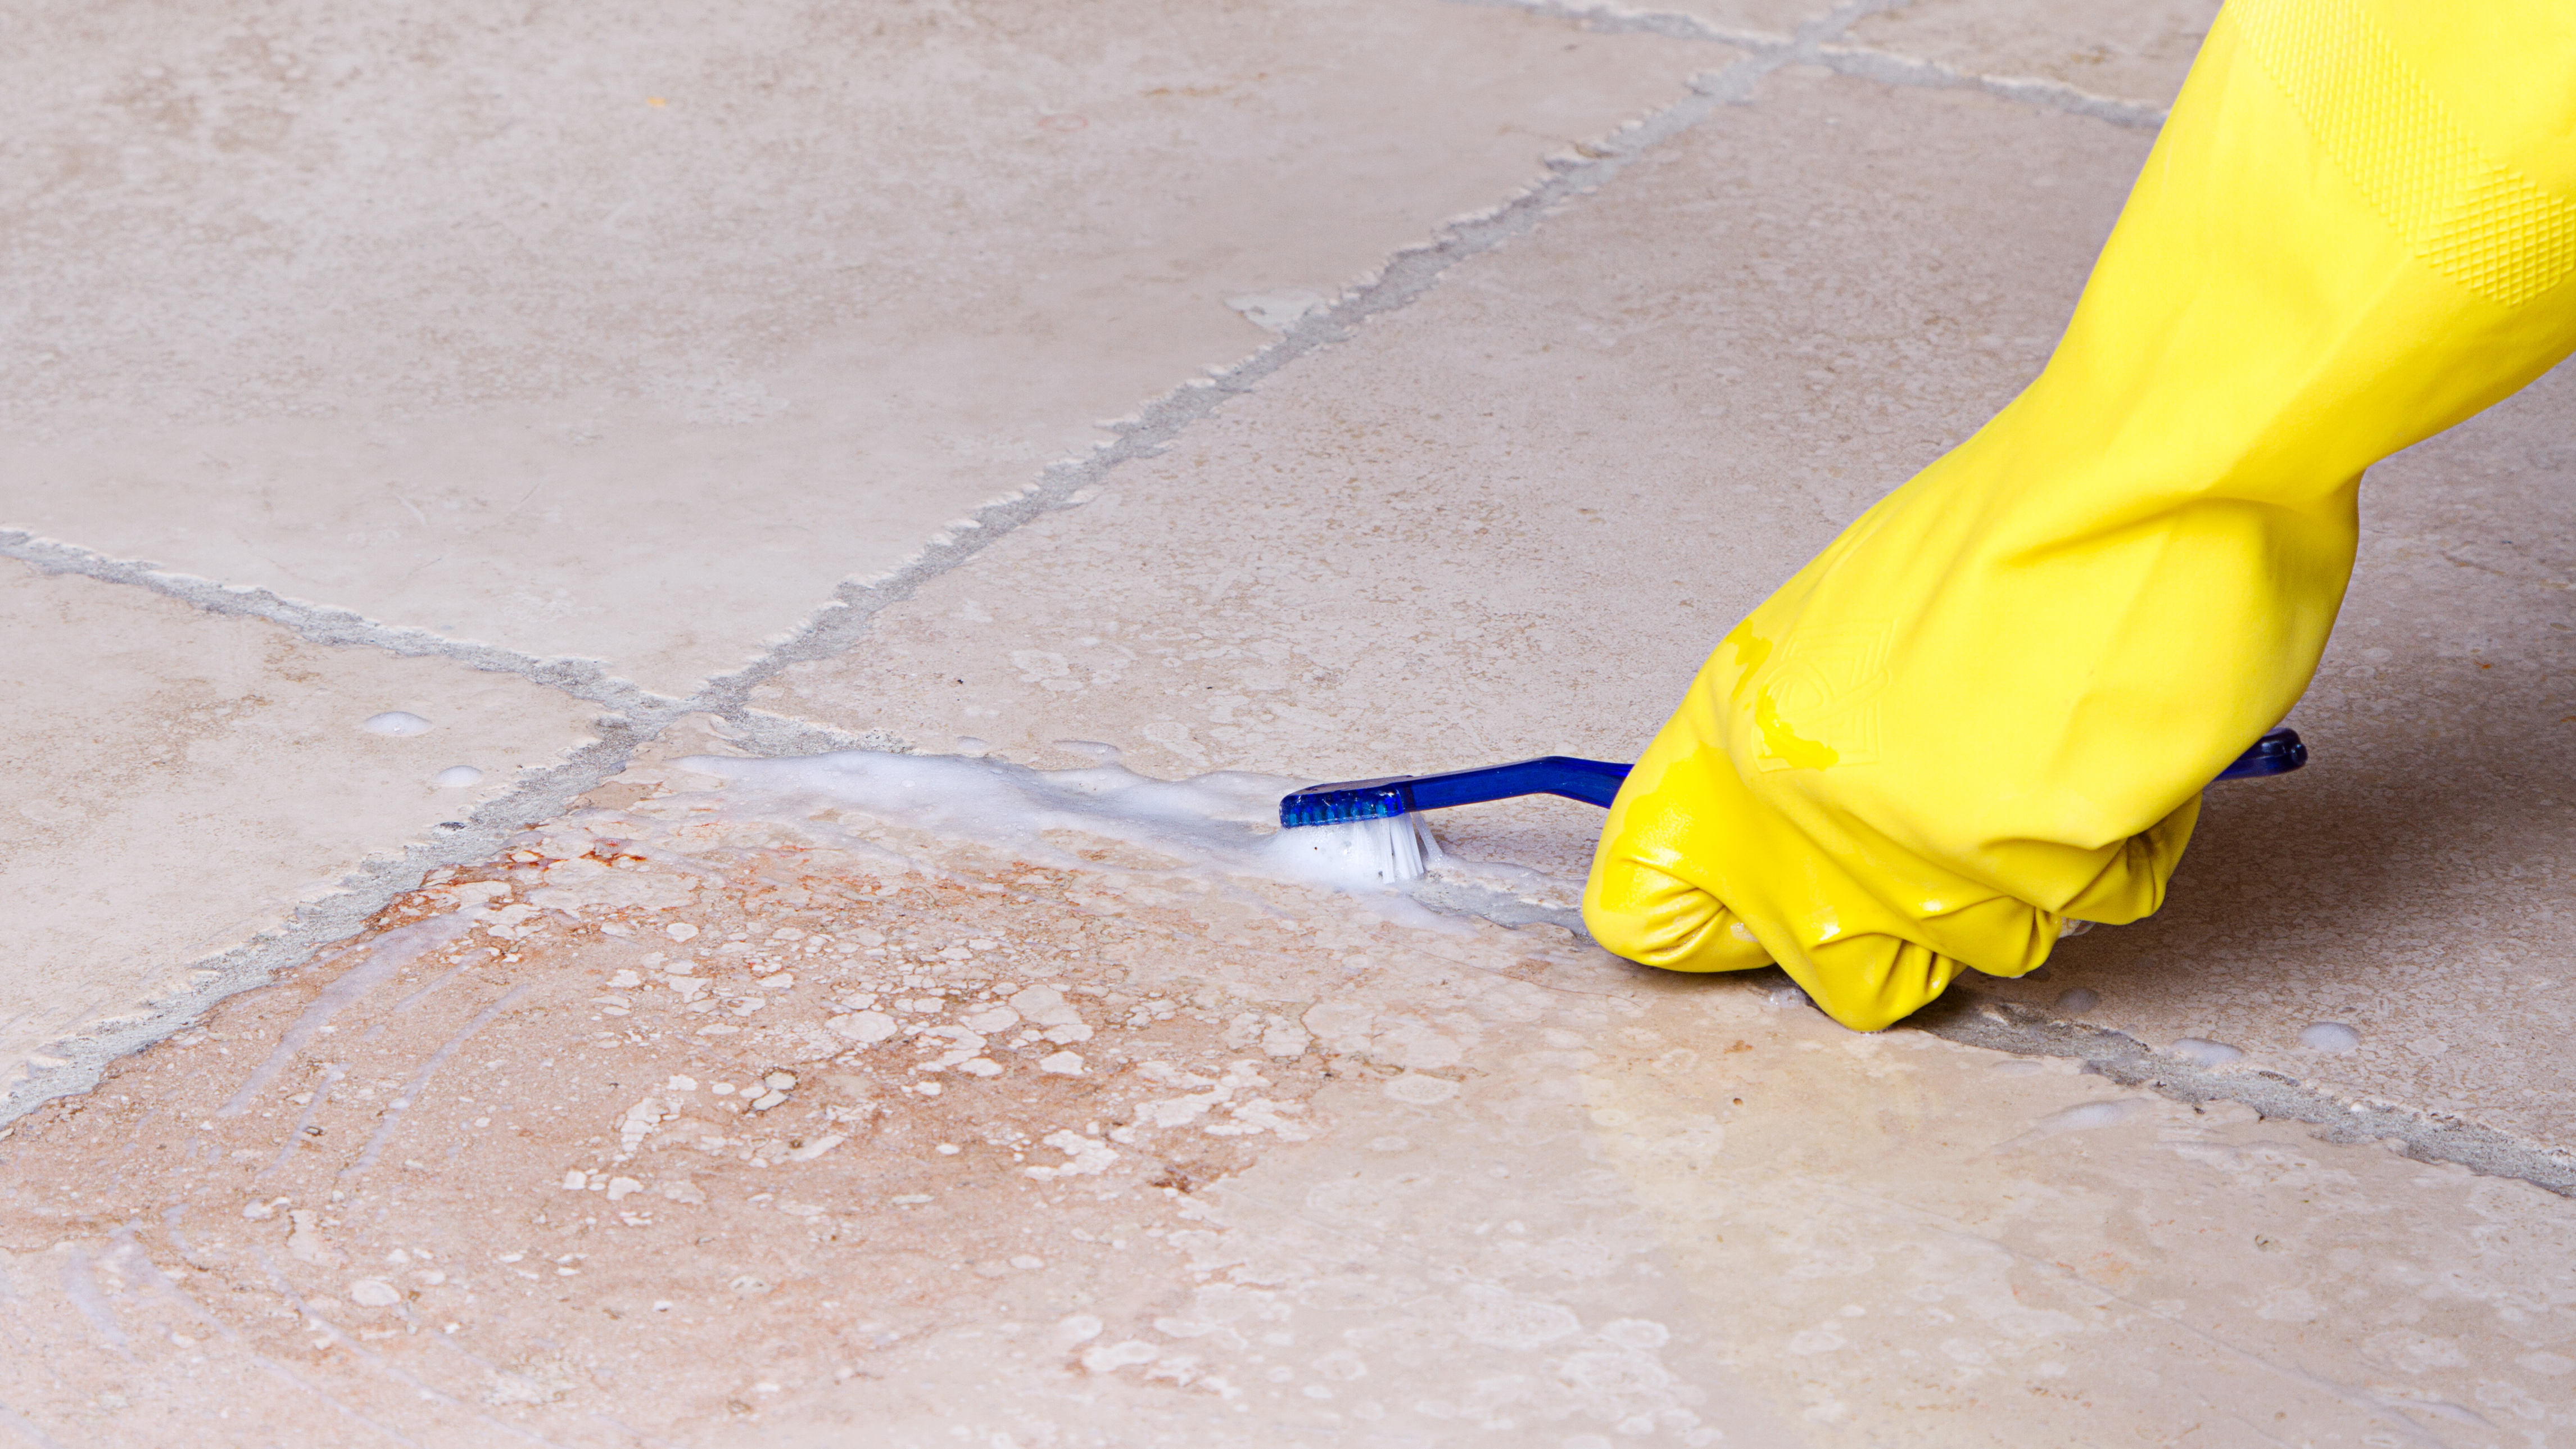 How To Clean Grout On Floor Tiles, How To Remove Grout Stains From Floor Tiles